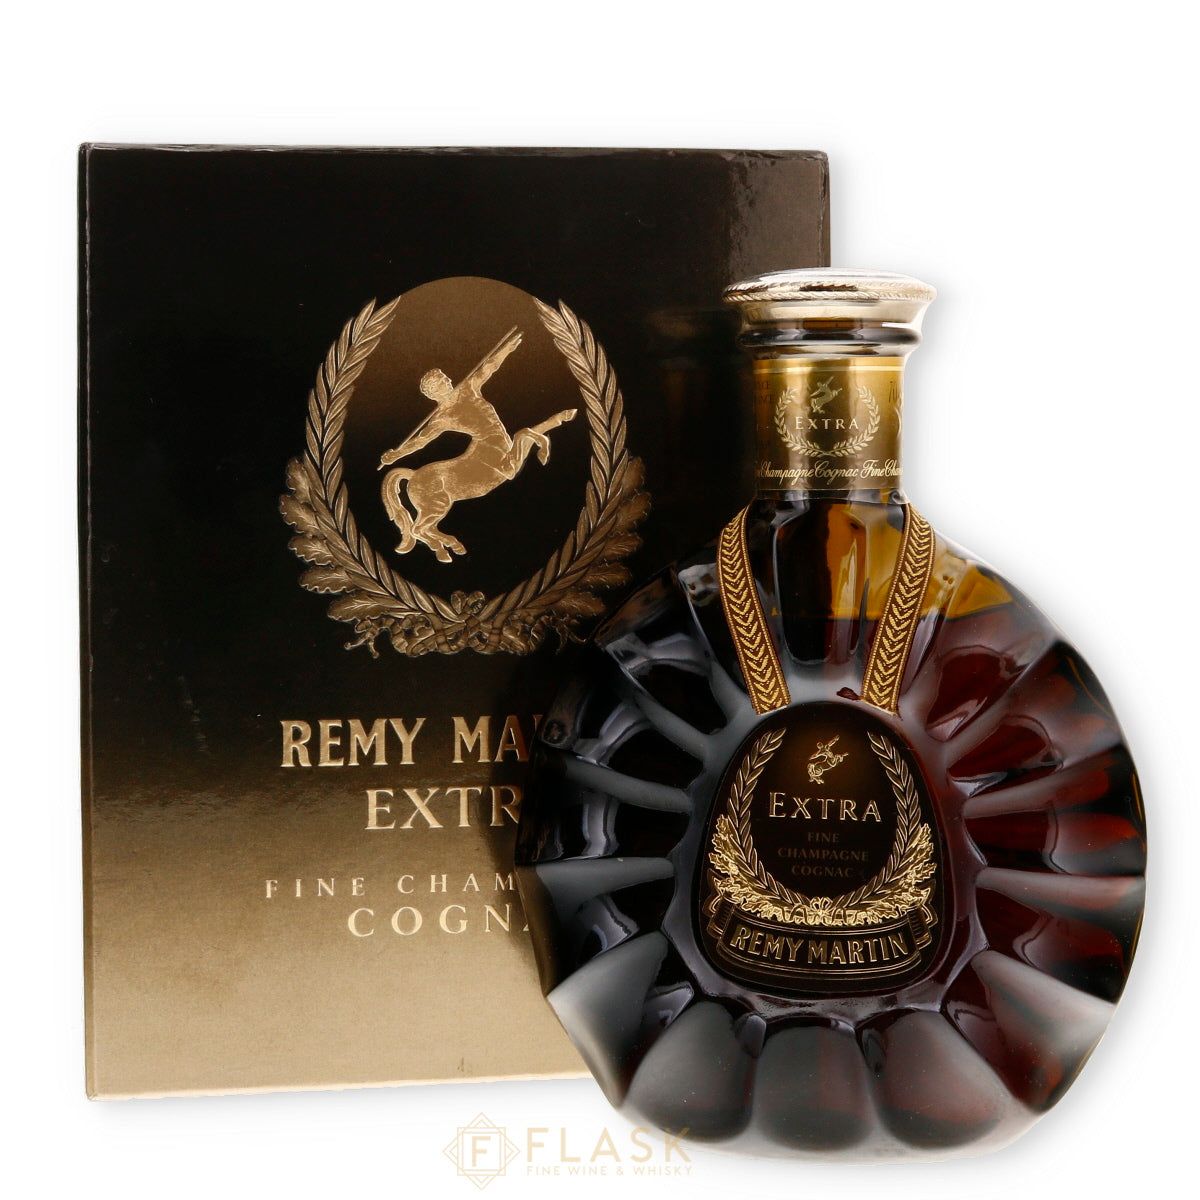 Buy Remy Martin - Price, Offers, Delivery